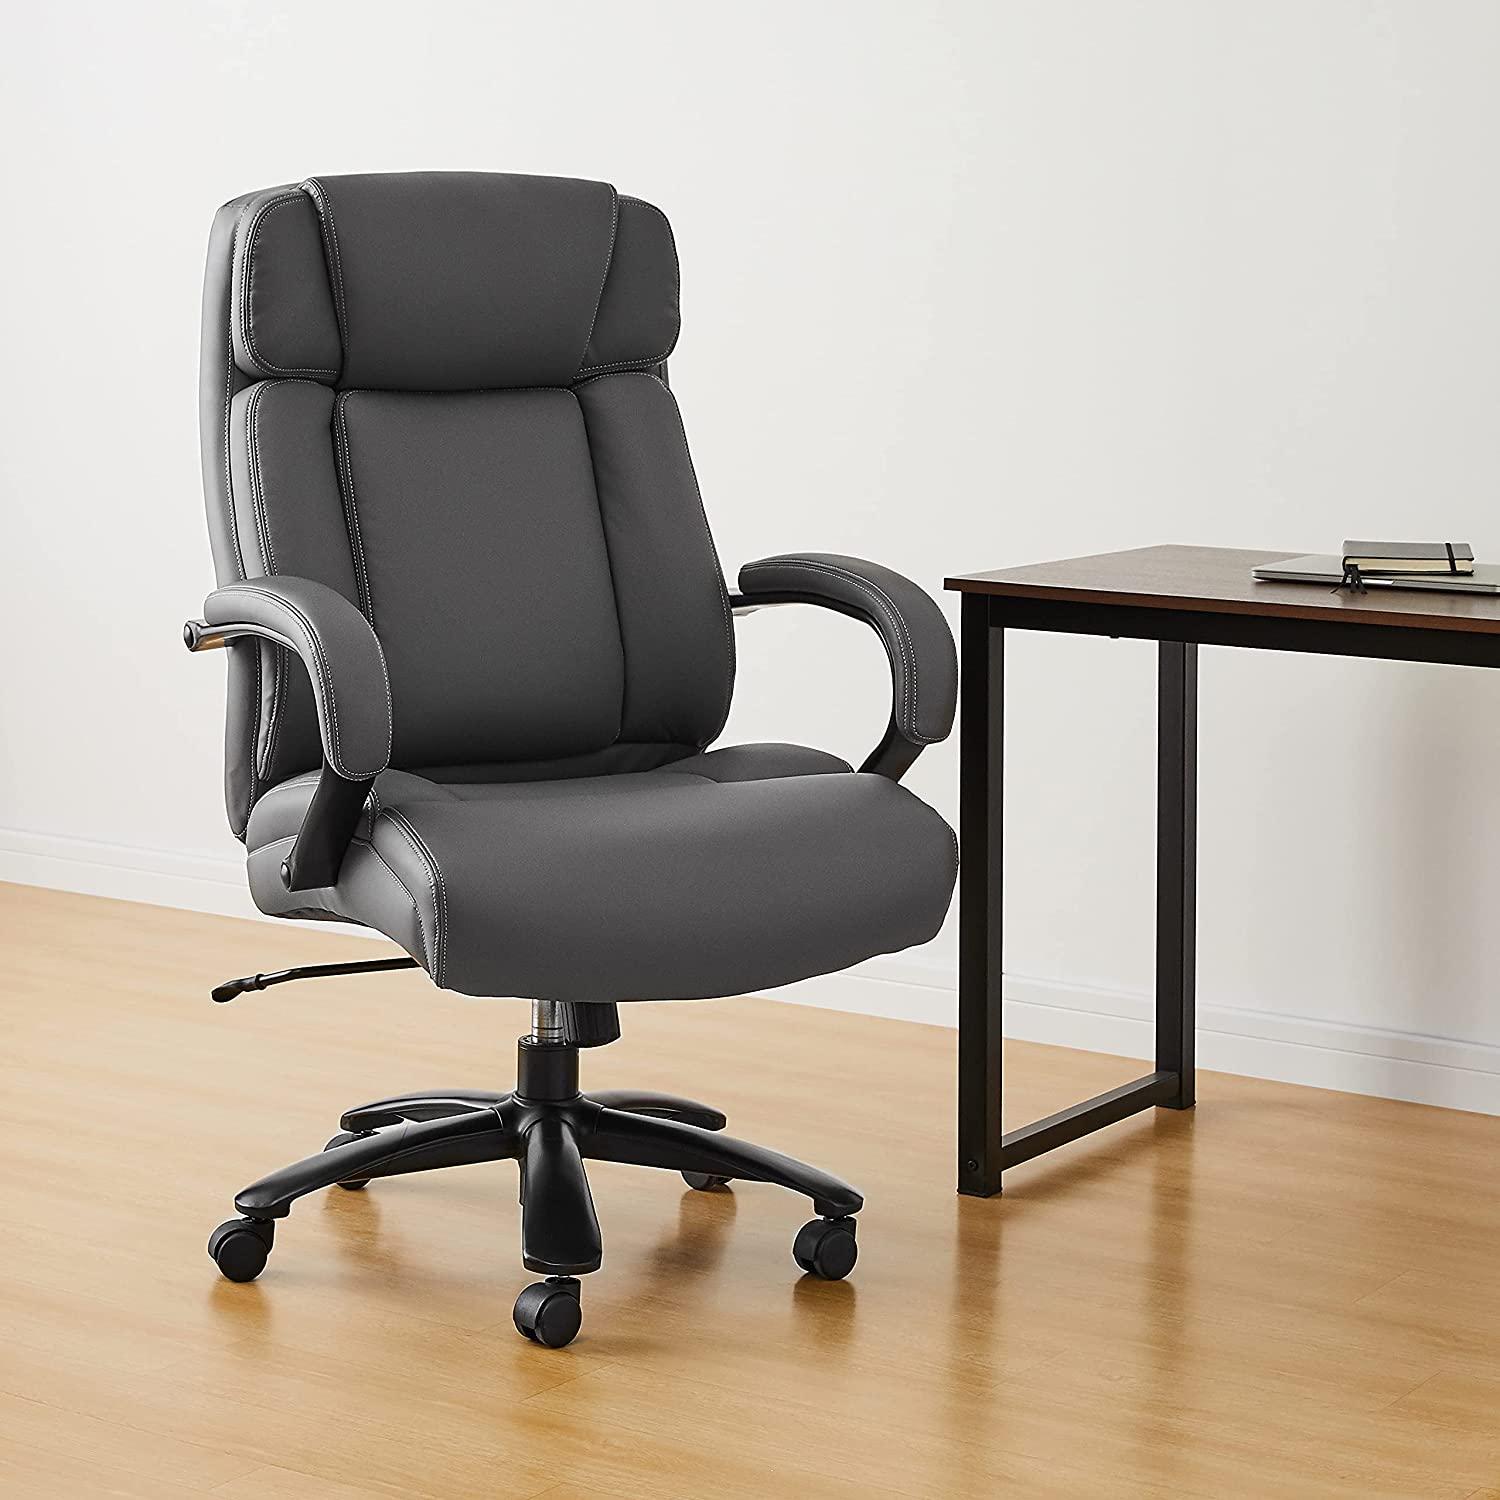 Big & Tall Adjustable Executive Office Chair - 500-Pound Capacity, Grey Faux Leather-$140